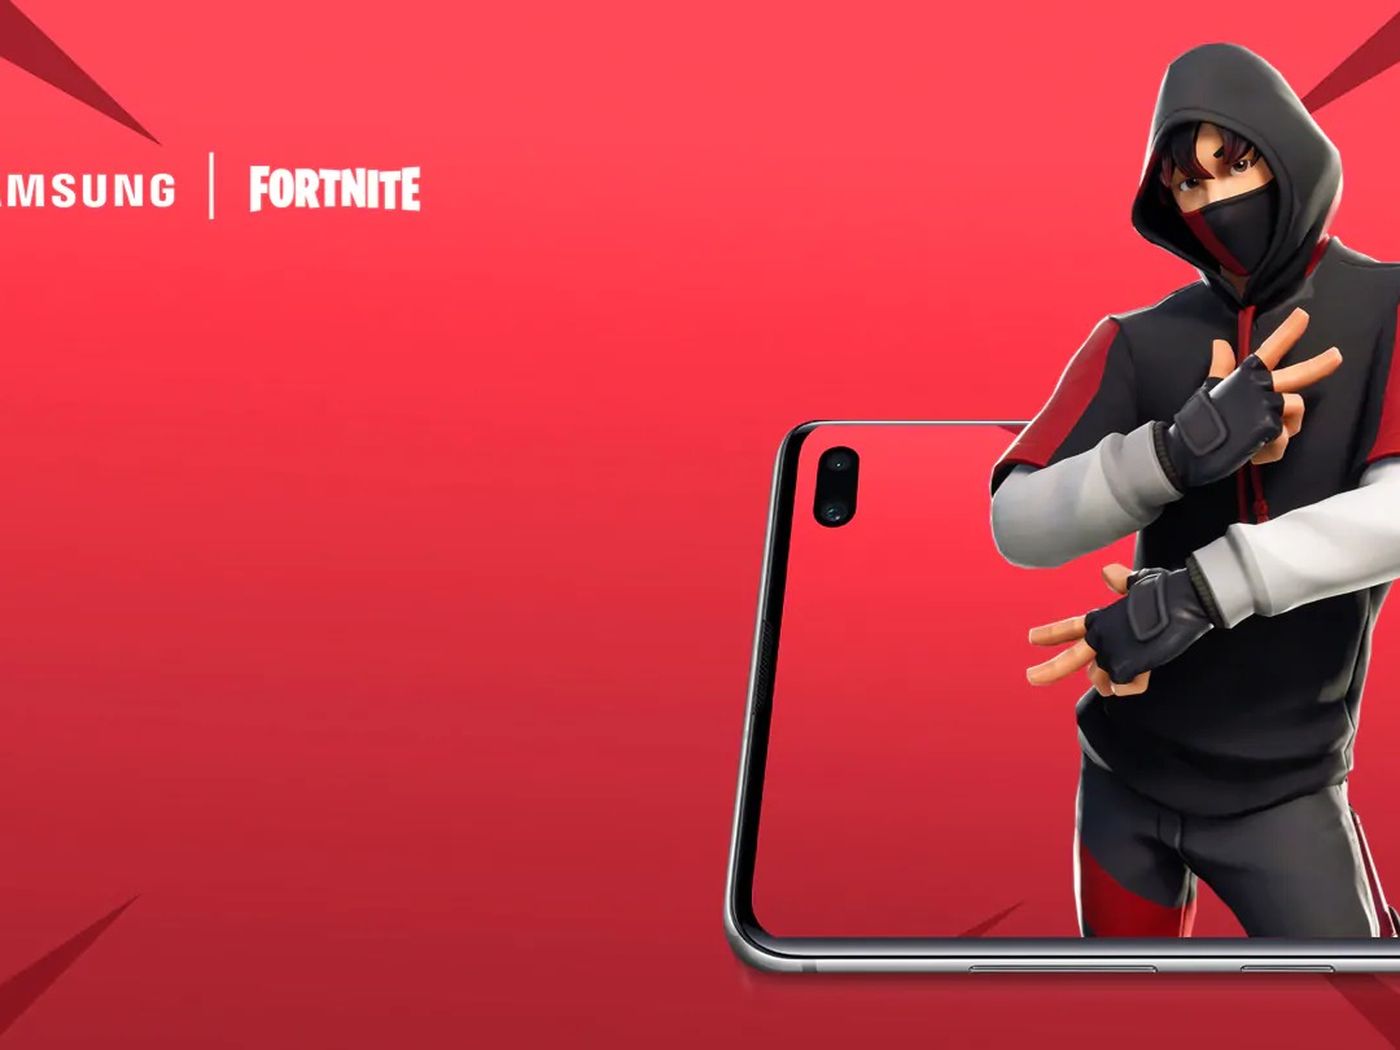 Galaxy S10 Plus preorders will come with an exclusive Fortnite